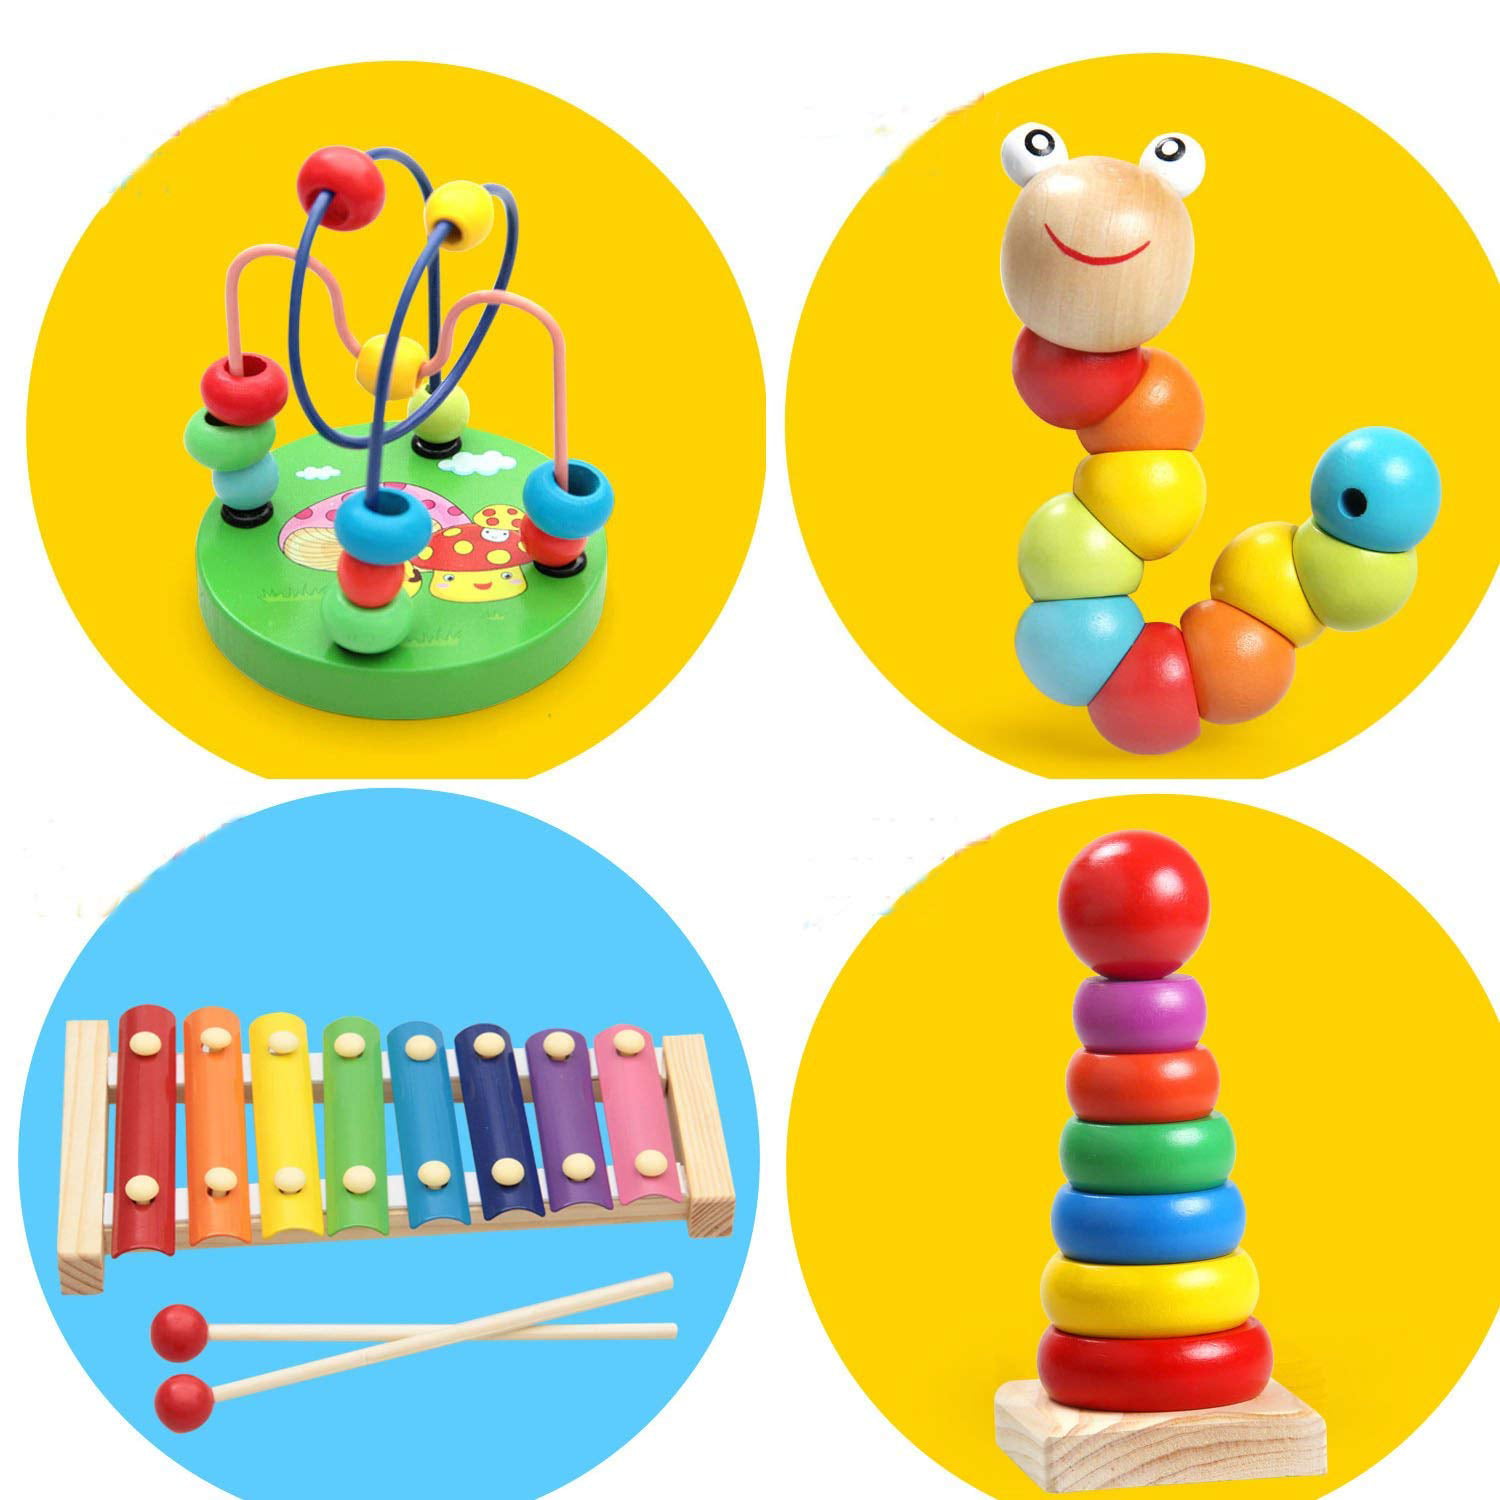 1 Sets of Wooden Educational Toys - Preschool Learning First Developmental  Toy Birthday Gift for Toddlers Kids Baby Children Boys Girls